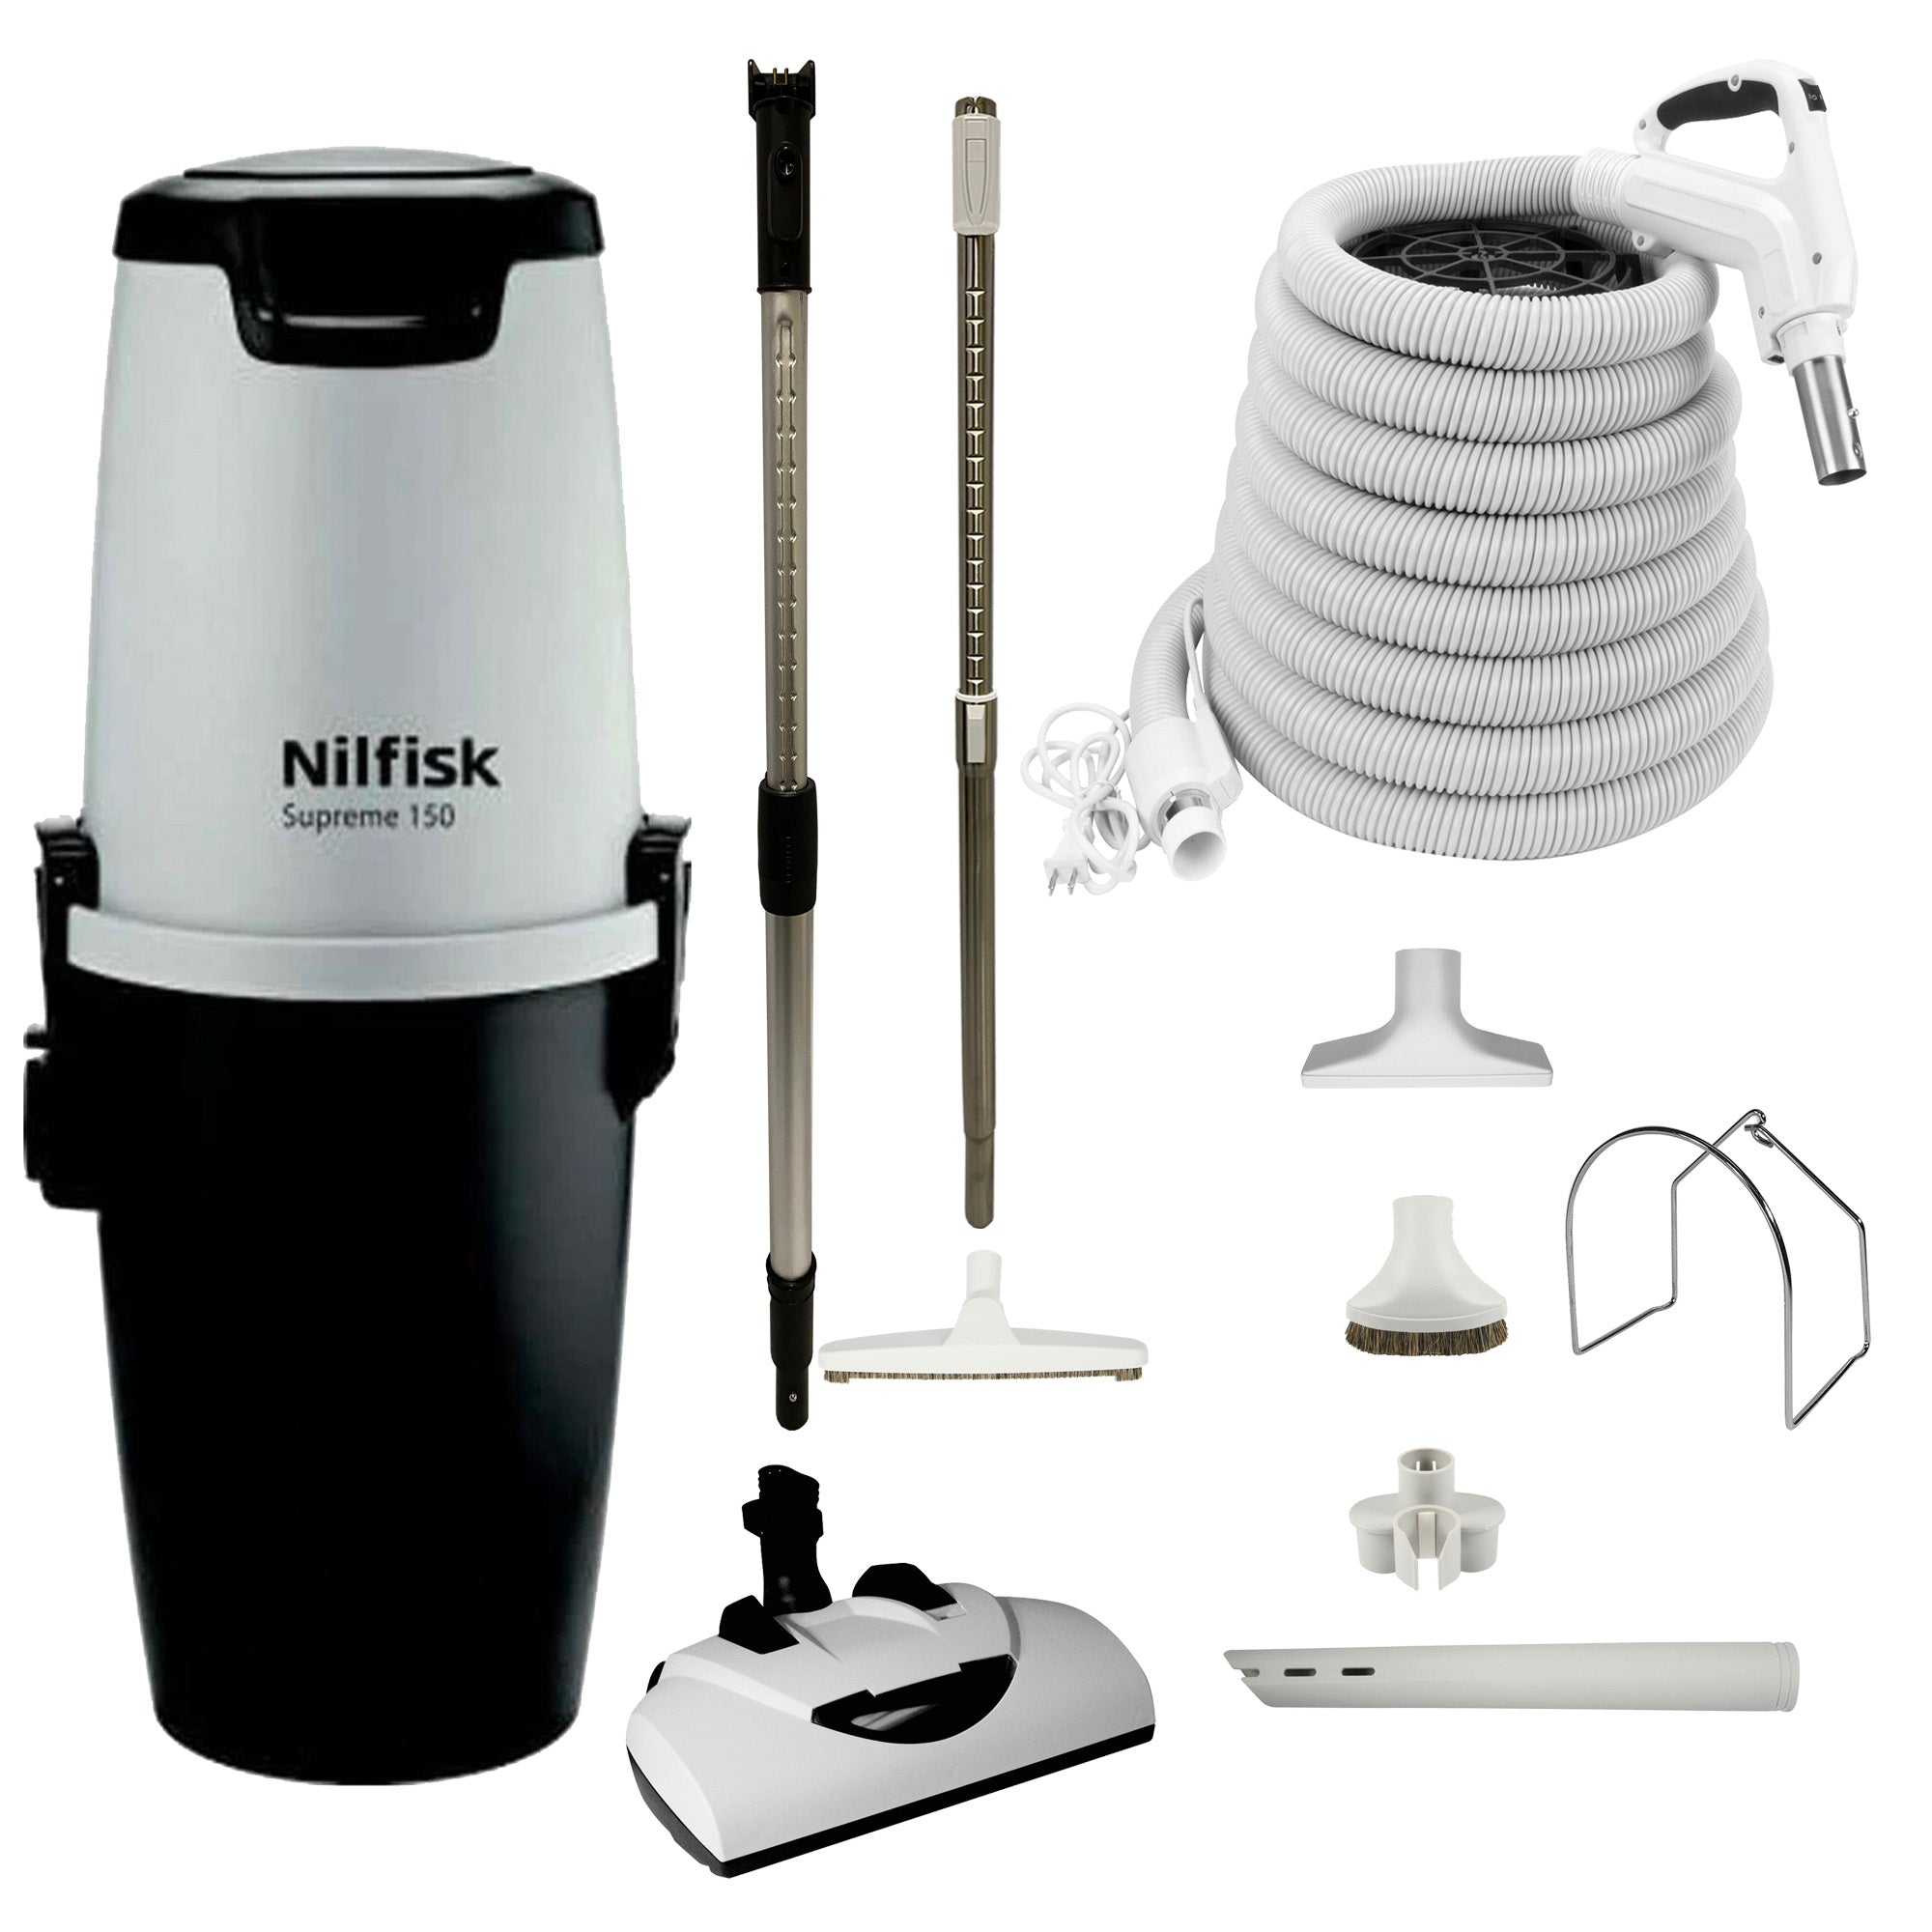 Nilfisk Supreme 150 Central Vacuum with Deluxe Electric Package - White